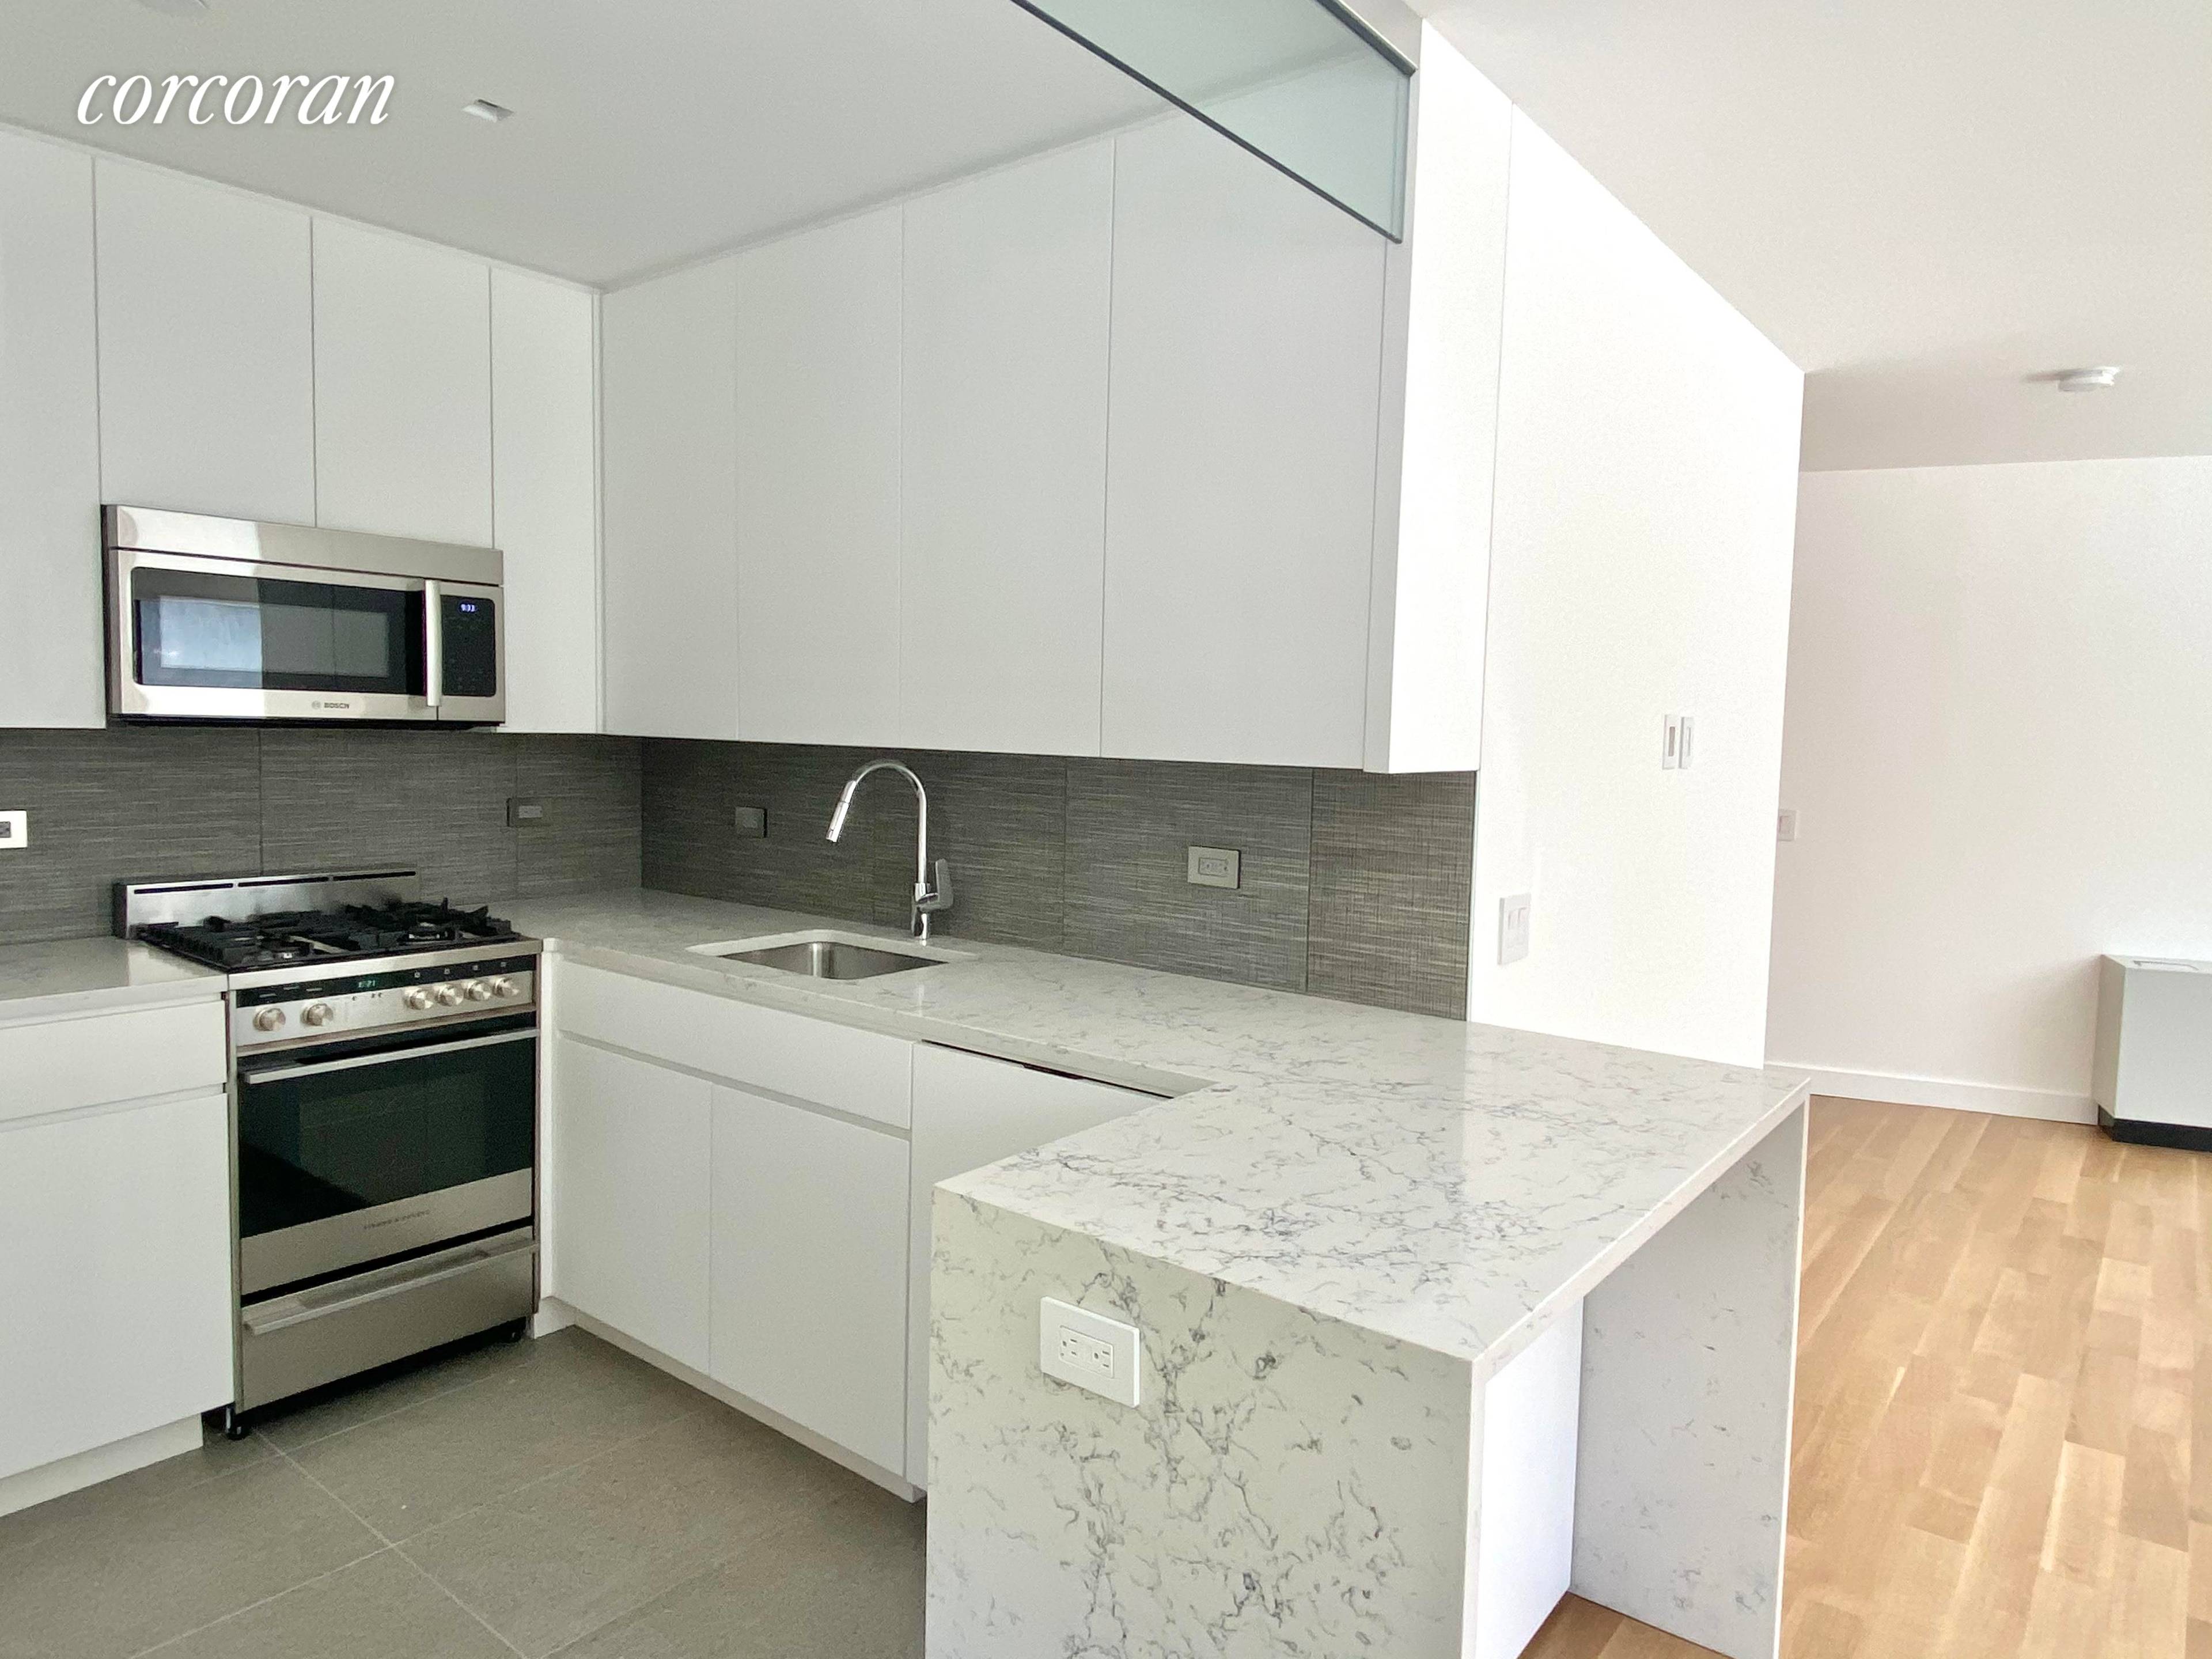 Elevator Building A ELEGANTLY GUT RENOVATED, rarely available West Village one bedroom.